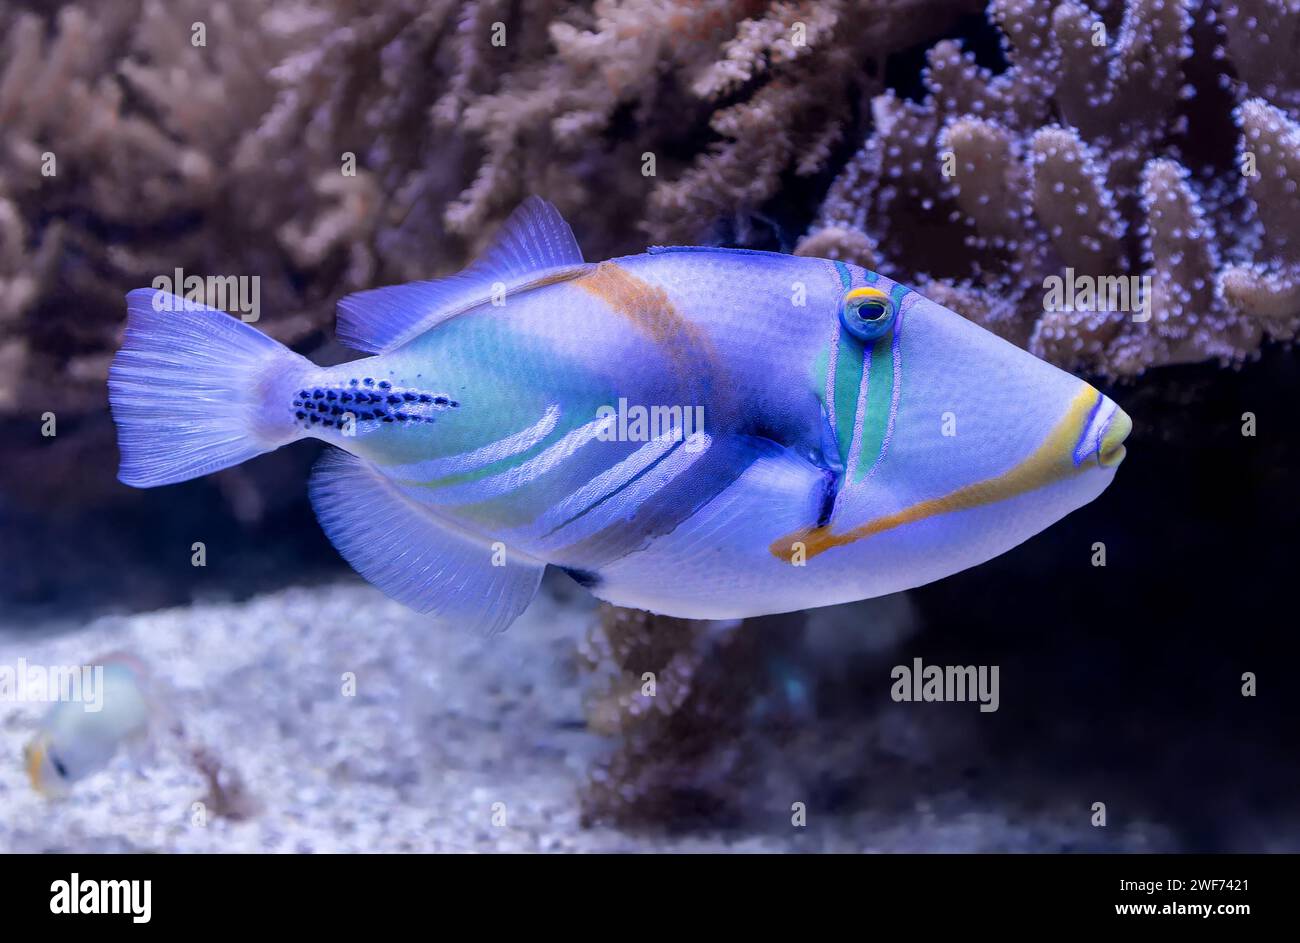 Close up view of a Lagoon triggerfish (Rhinecanthus aculeatus) Stock Photo